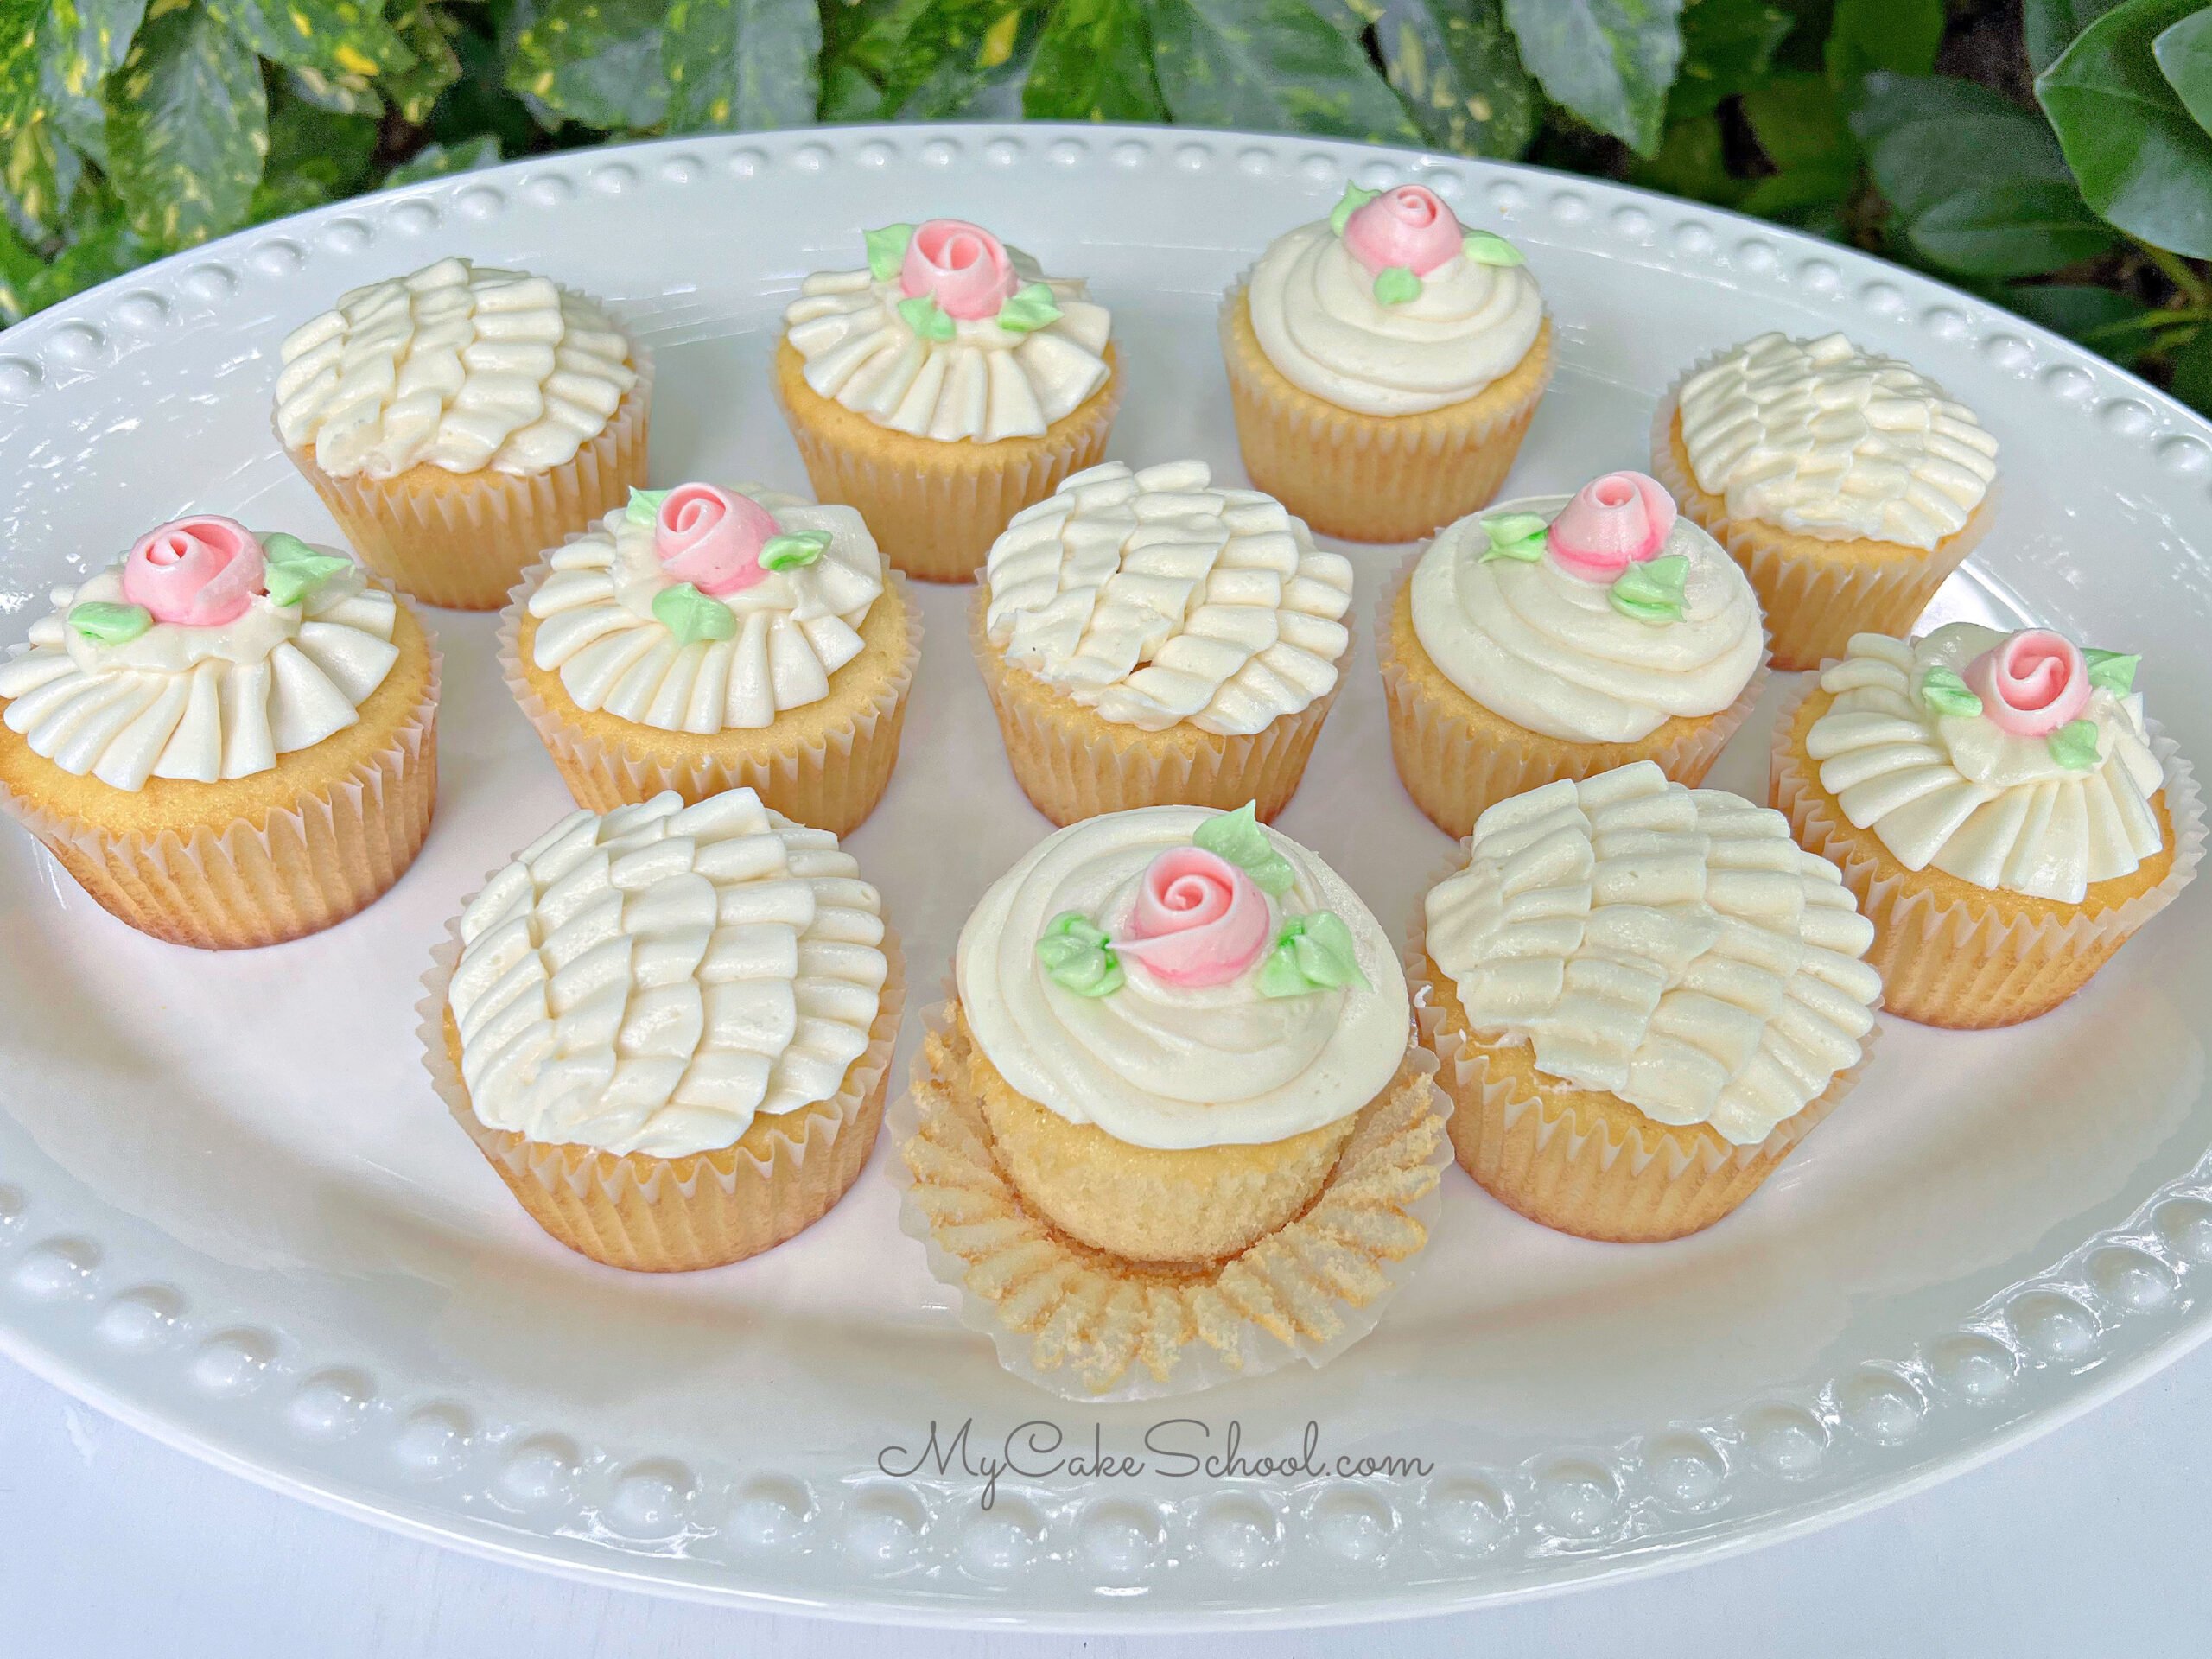 Platter of Vanilla Cupcakes, frosted with buttercream ruffles and roses